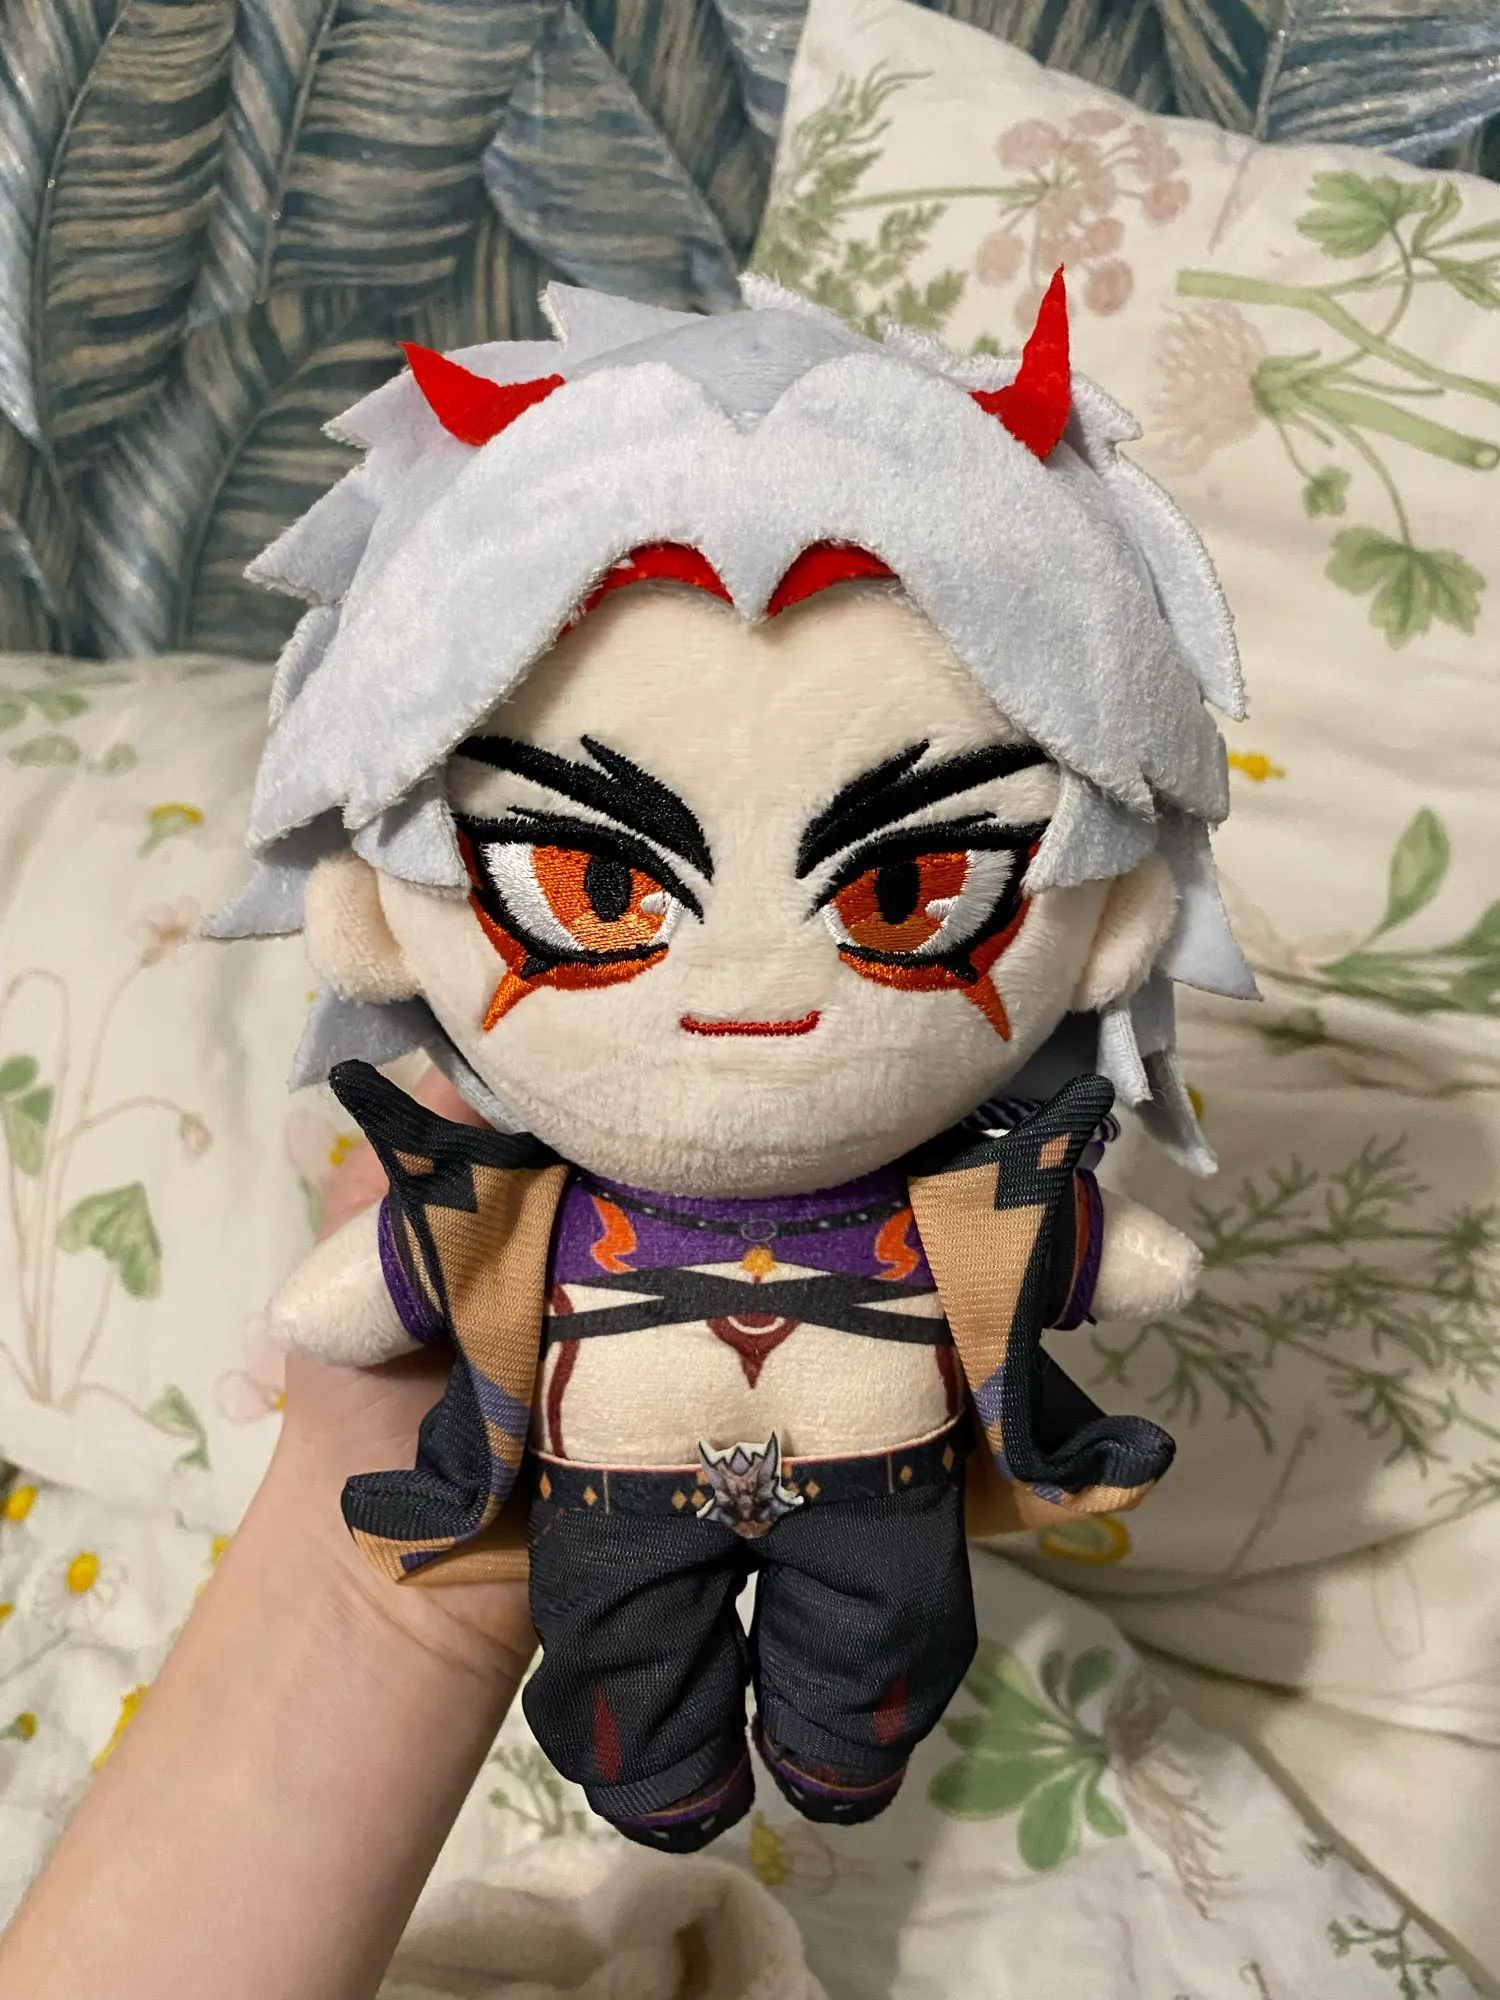 Genshin Impact Arataki Itto Plushie Toy Stuffed Plush Doll Game Figurine Cosplay Cute Kawaii Pillow Fans Props Accessories Gifts 20cm serpent spine genshin impact arataki itto chinese mobile game peripherals metal two handed sword weapons model toys for boy